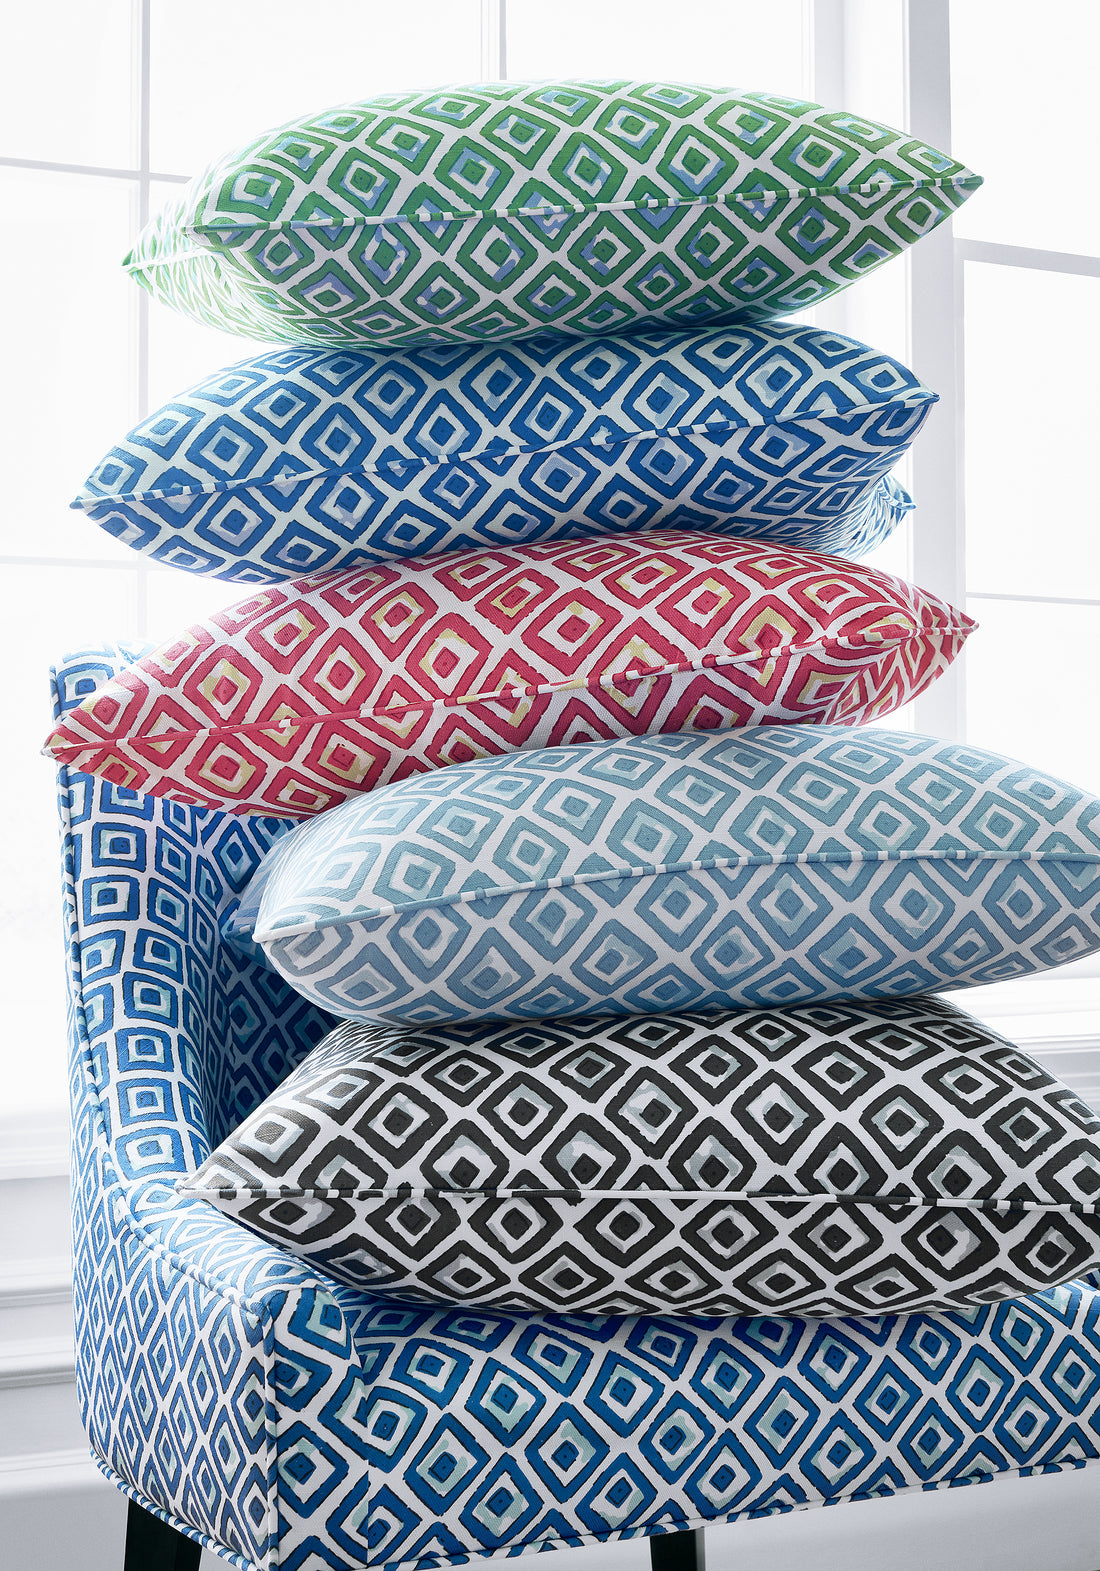 Pillow made with Thibaut Indian Diamond printed fabric in black color - pattern number F910661